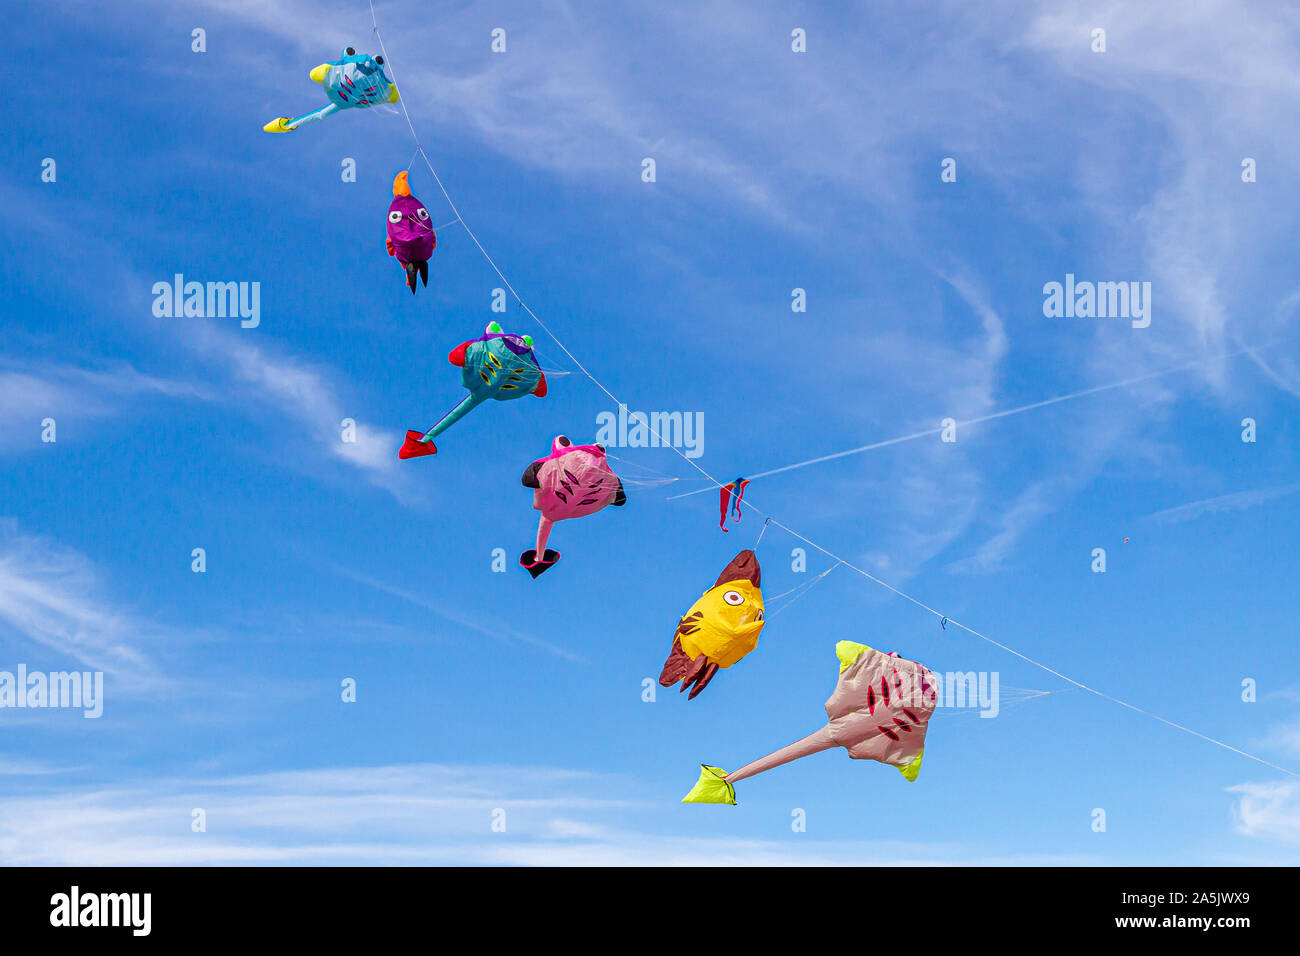 Colorful flying Kites in the blue sky Stock Photo